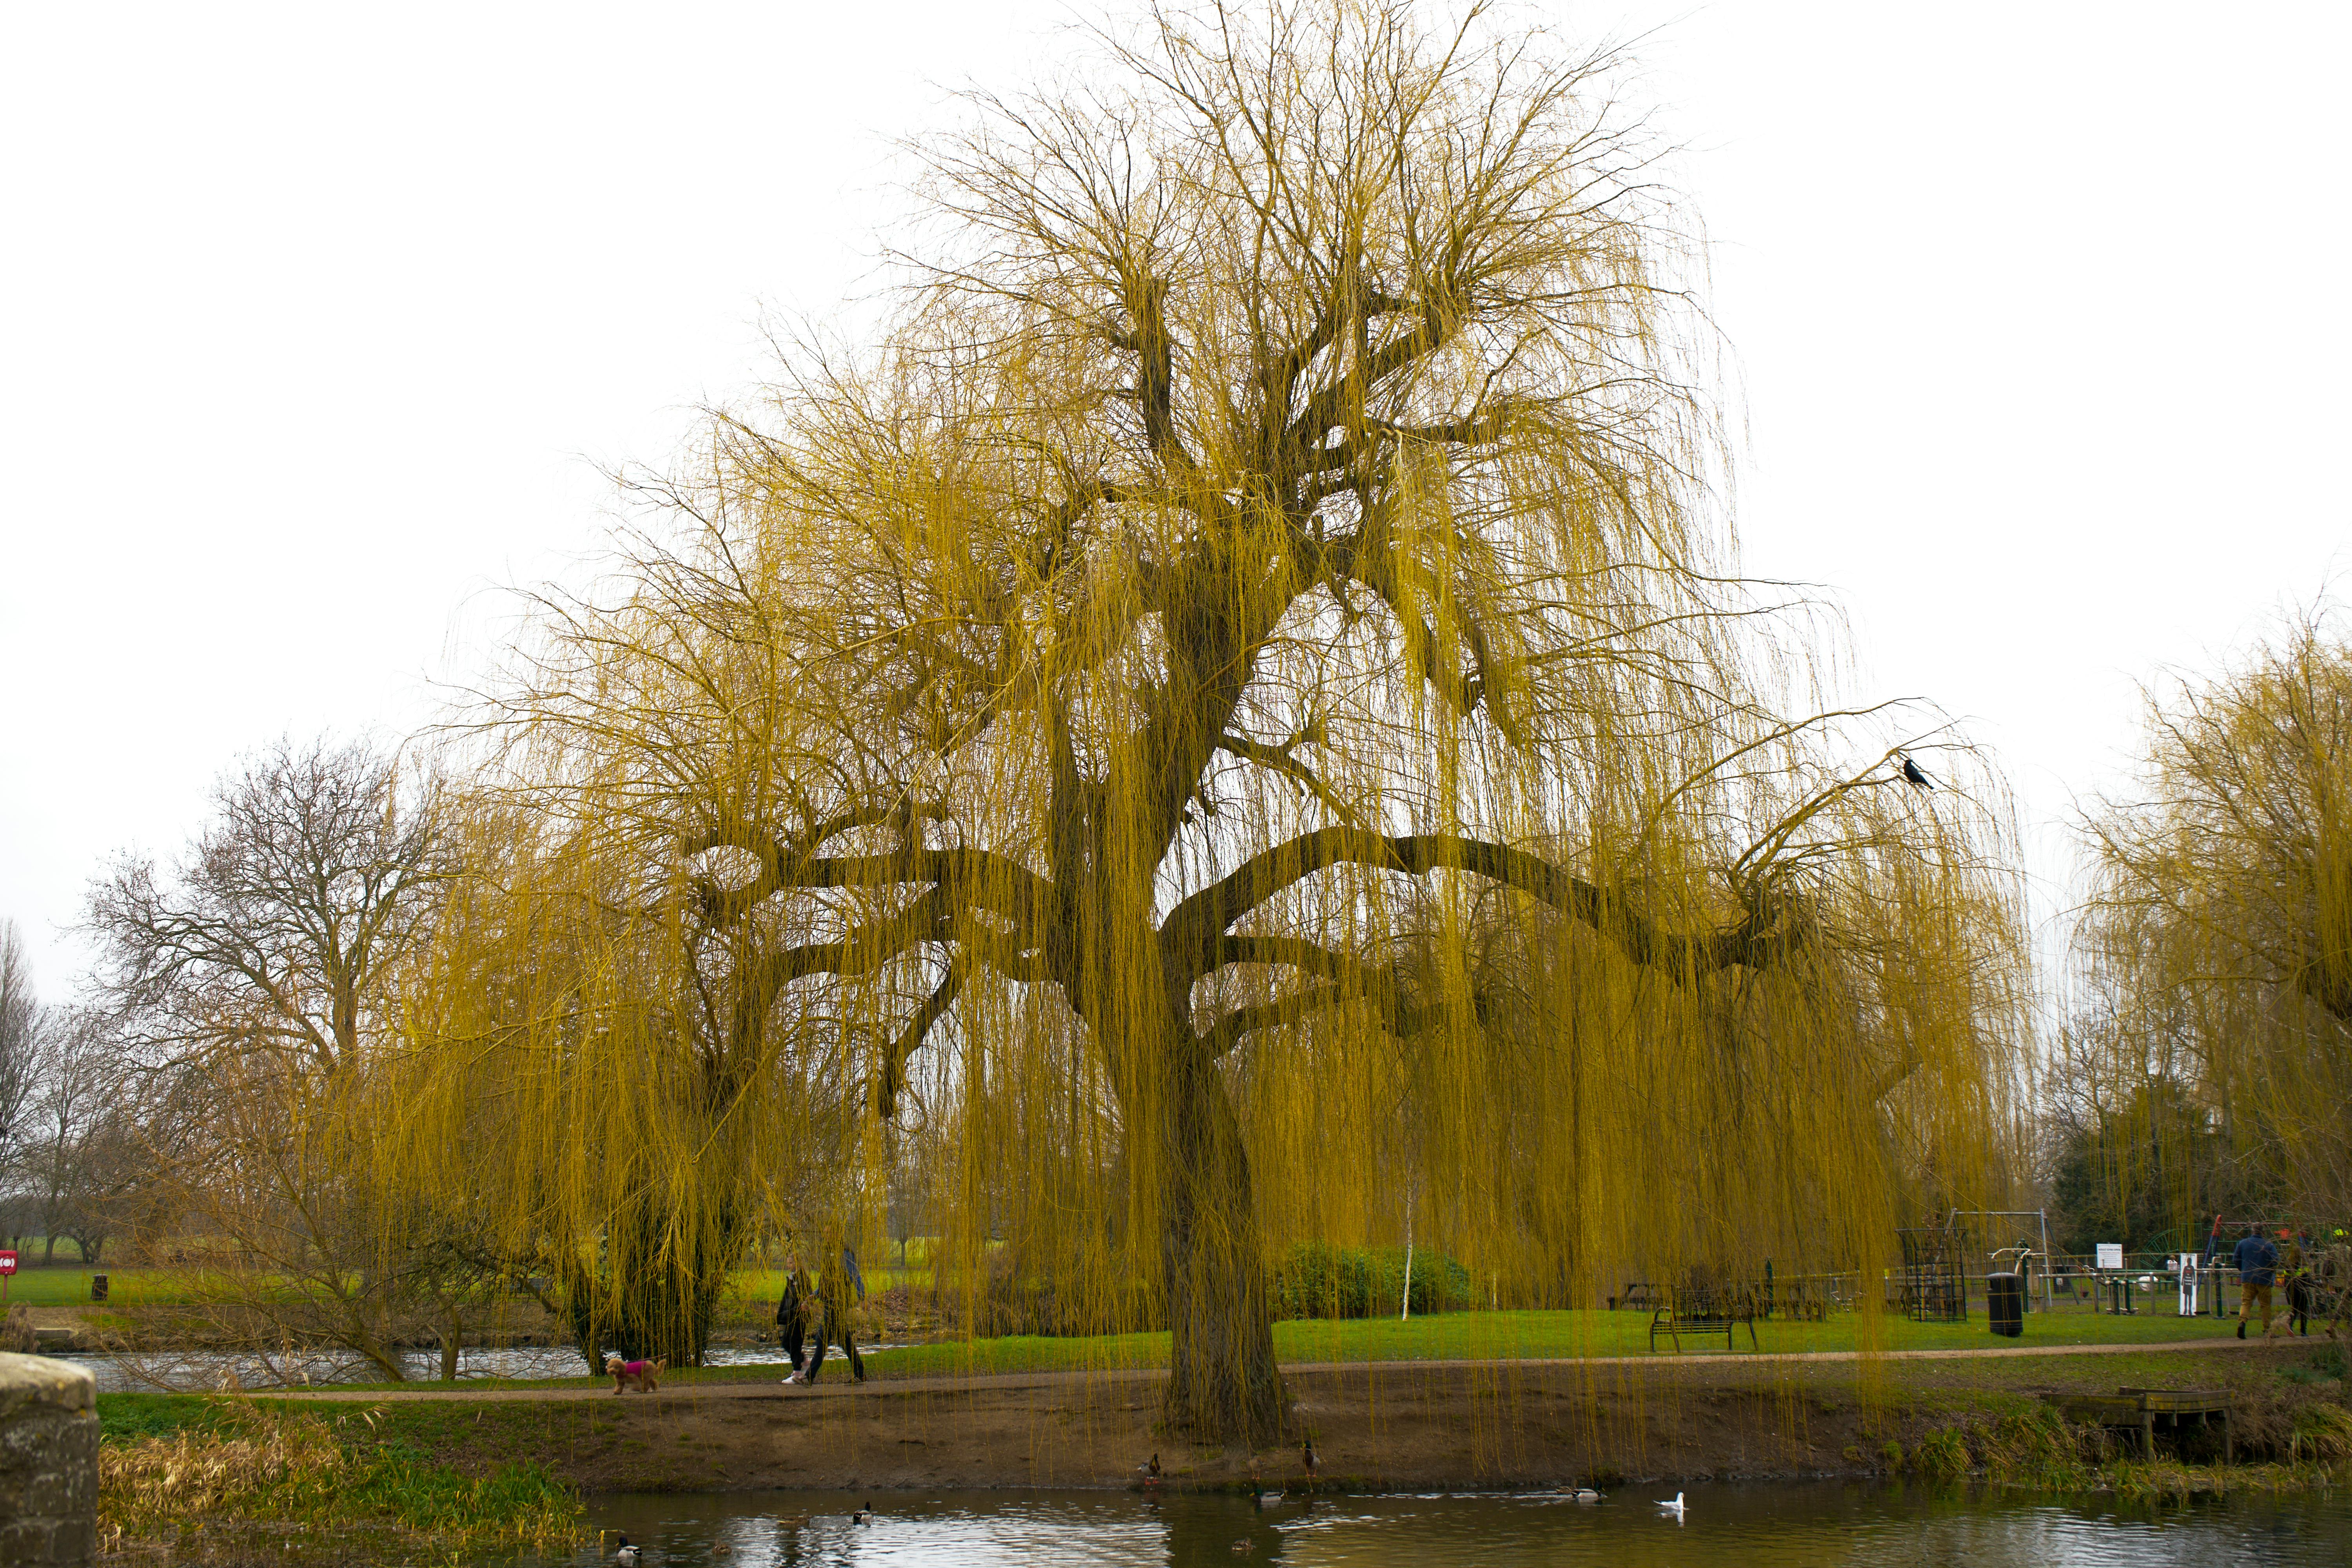 weeping willow tree wallpaper hd